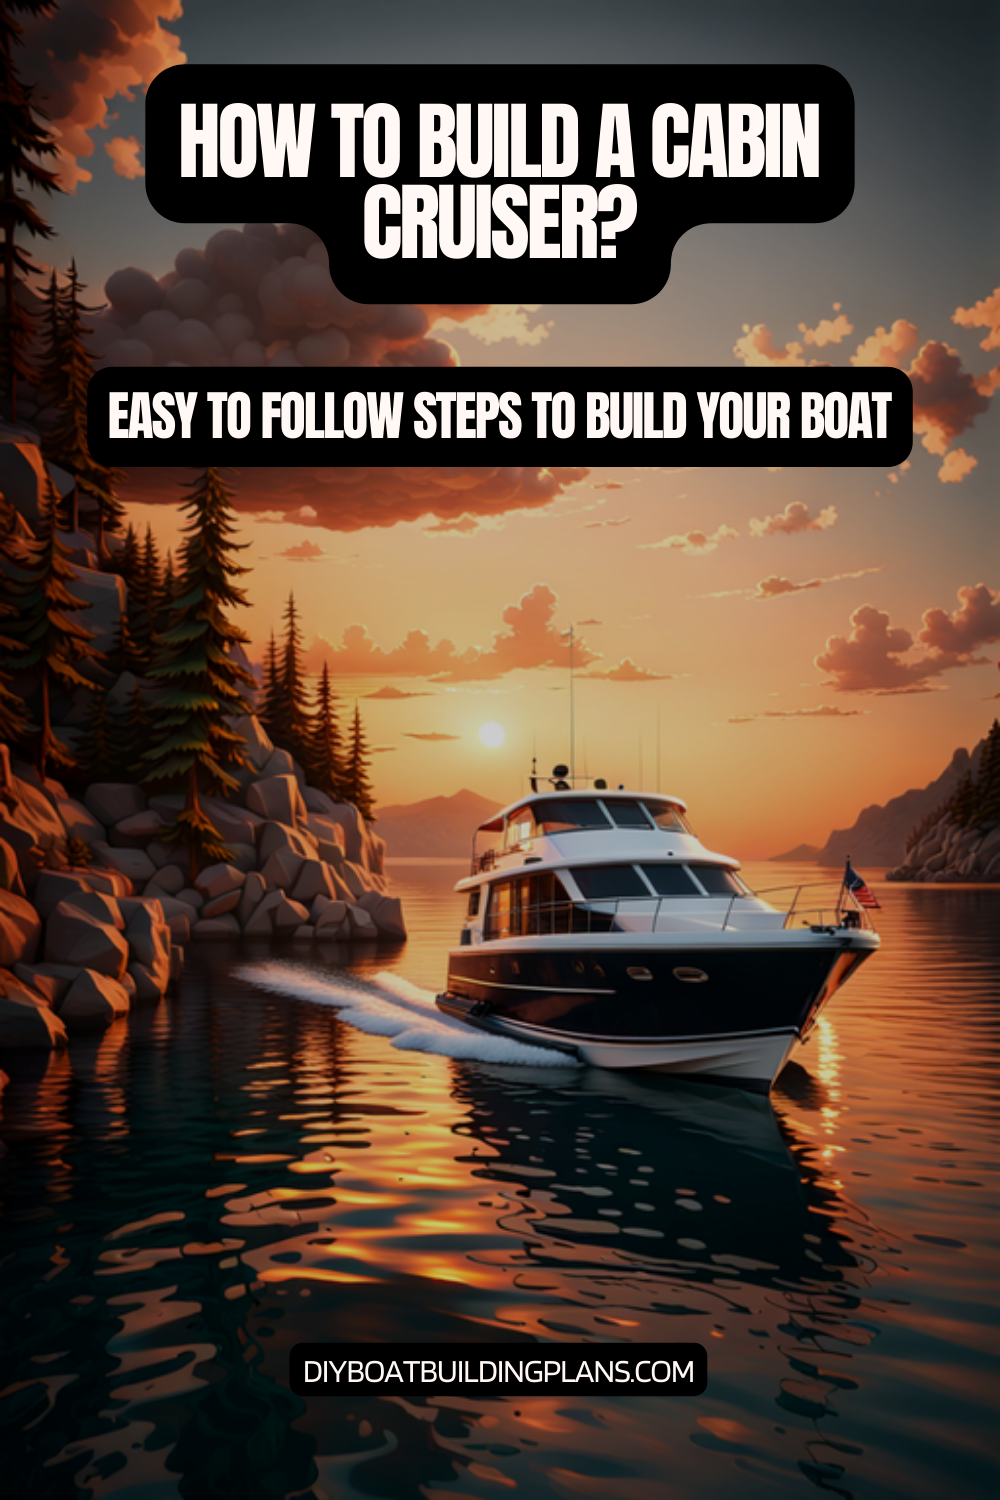 How To Build a Cabin Cruiser